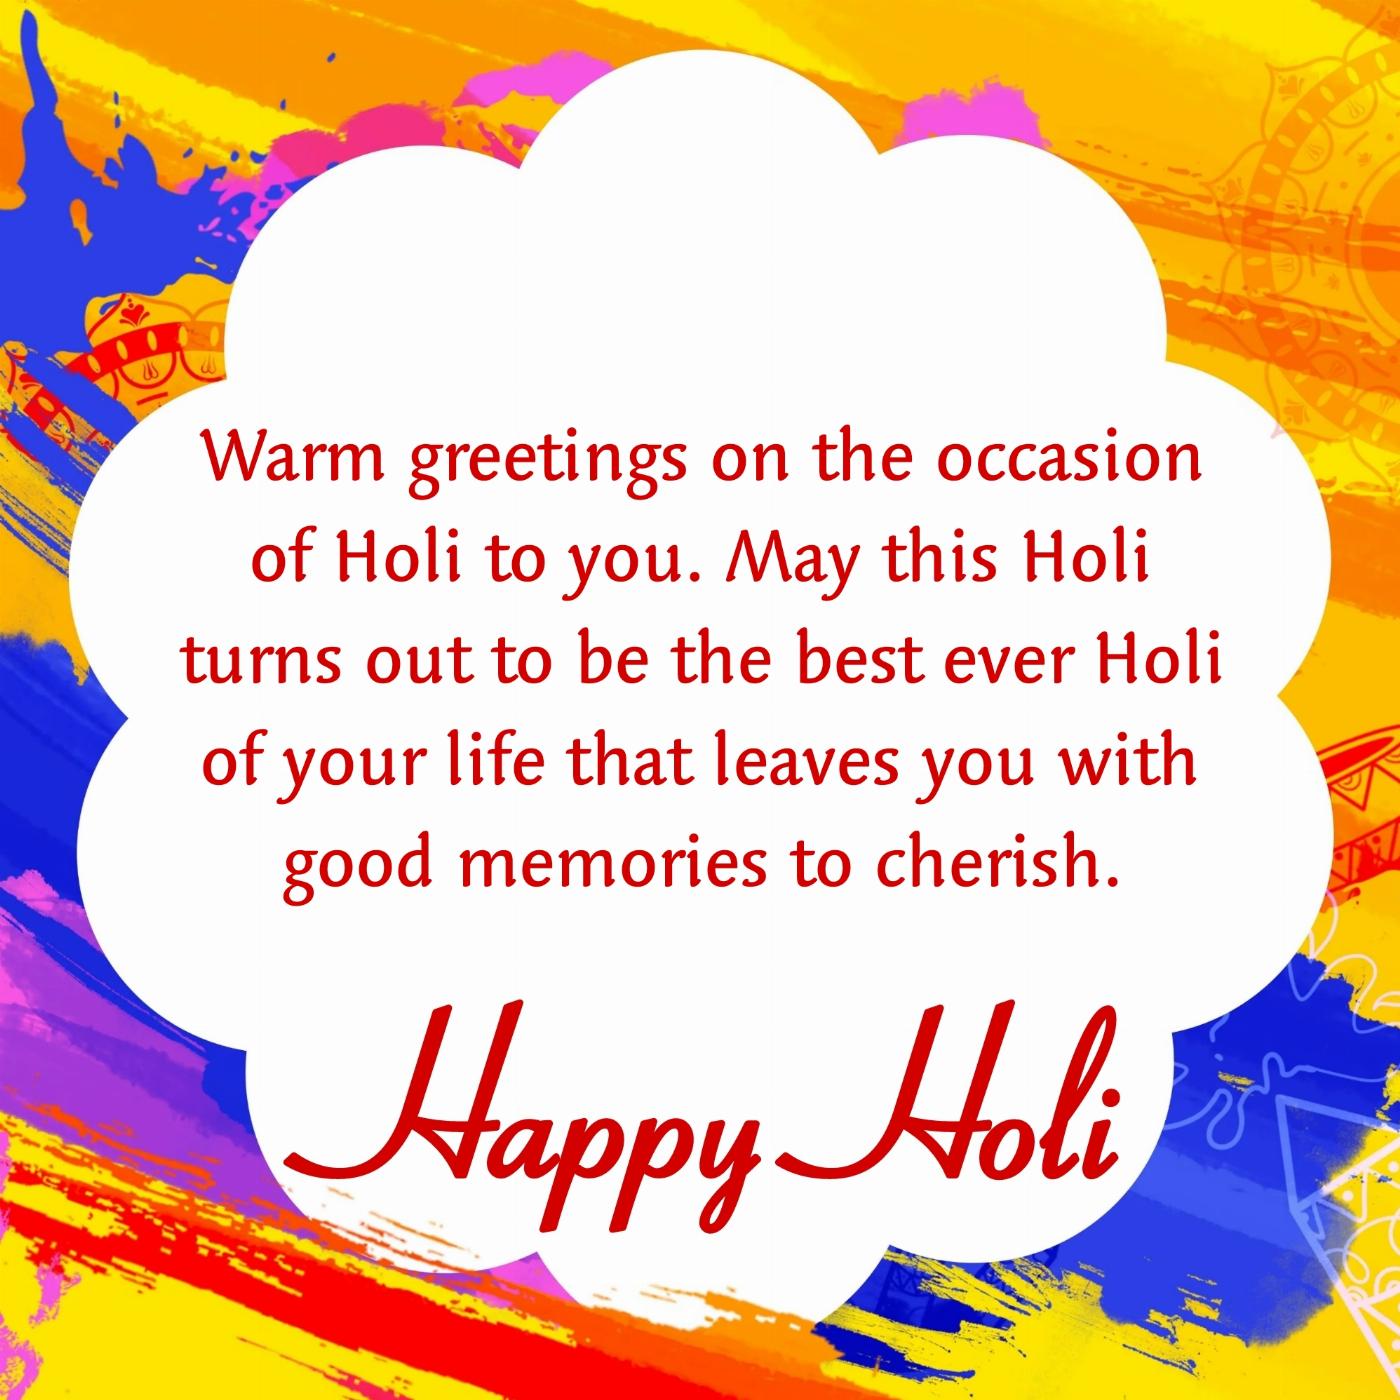 Warm greetings on the occasion of Holi to you